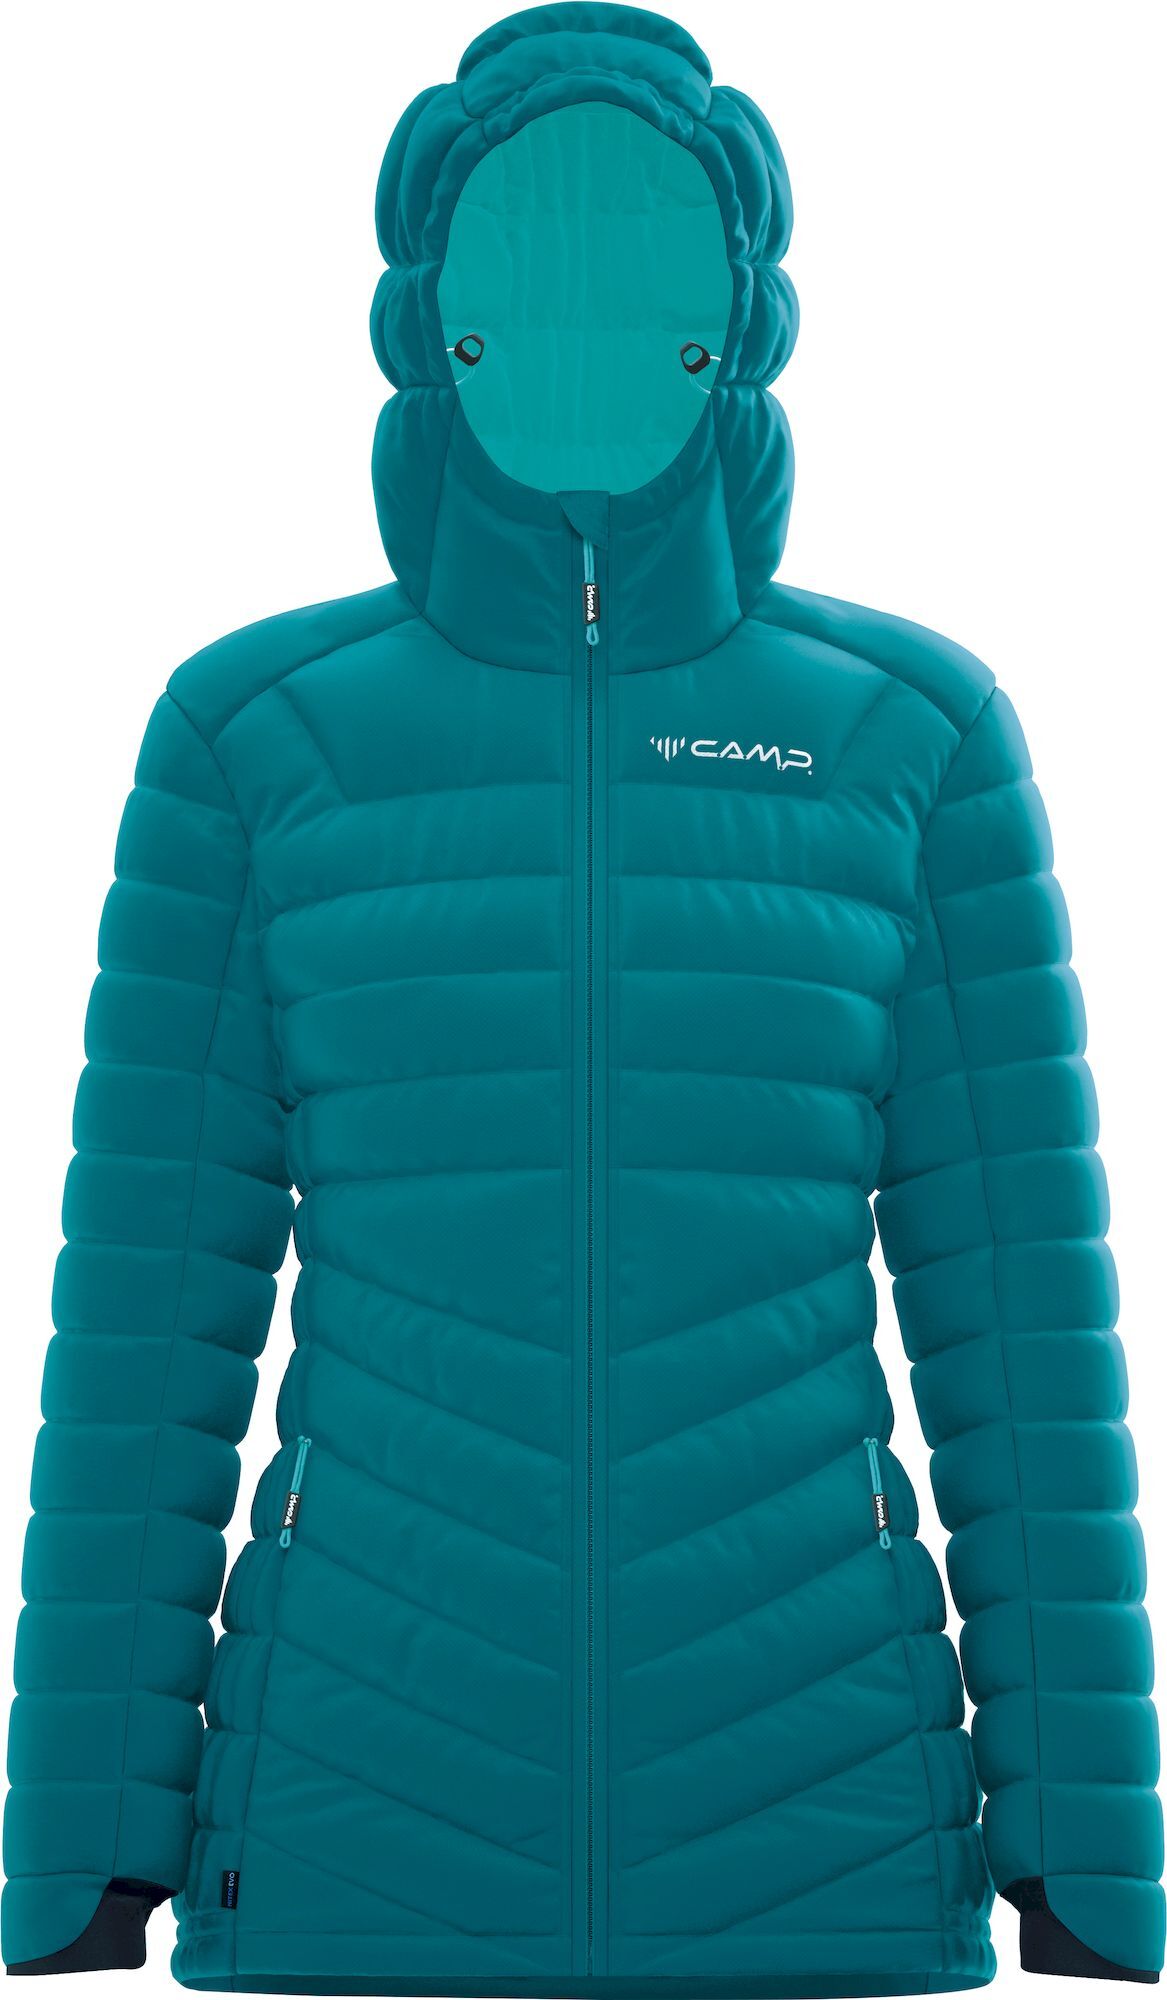 Camp Protection Jacket Lady - Giacca in piumino - Donna